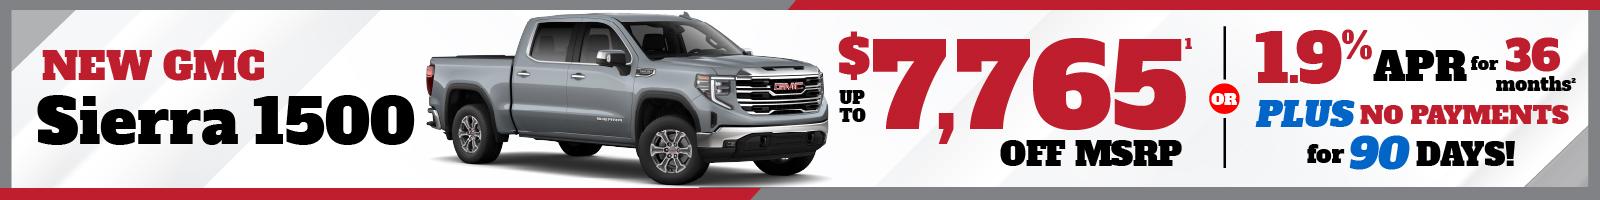 SAVE up to $7,765 or 1.9% APR for 36 months PLUS no payments for 90 days on NEW GMC Sierra 1500s!